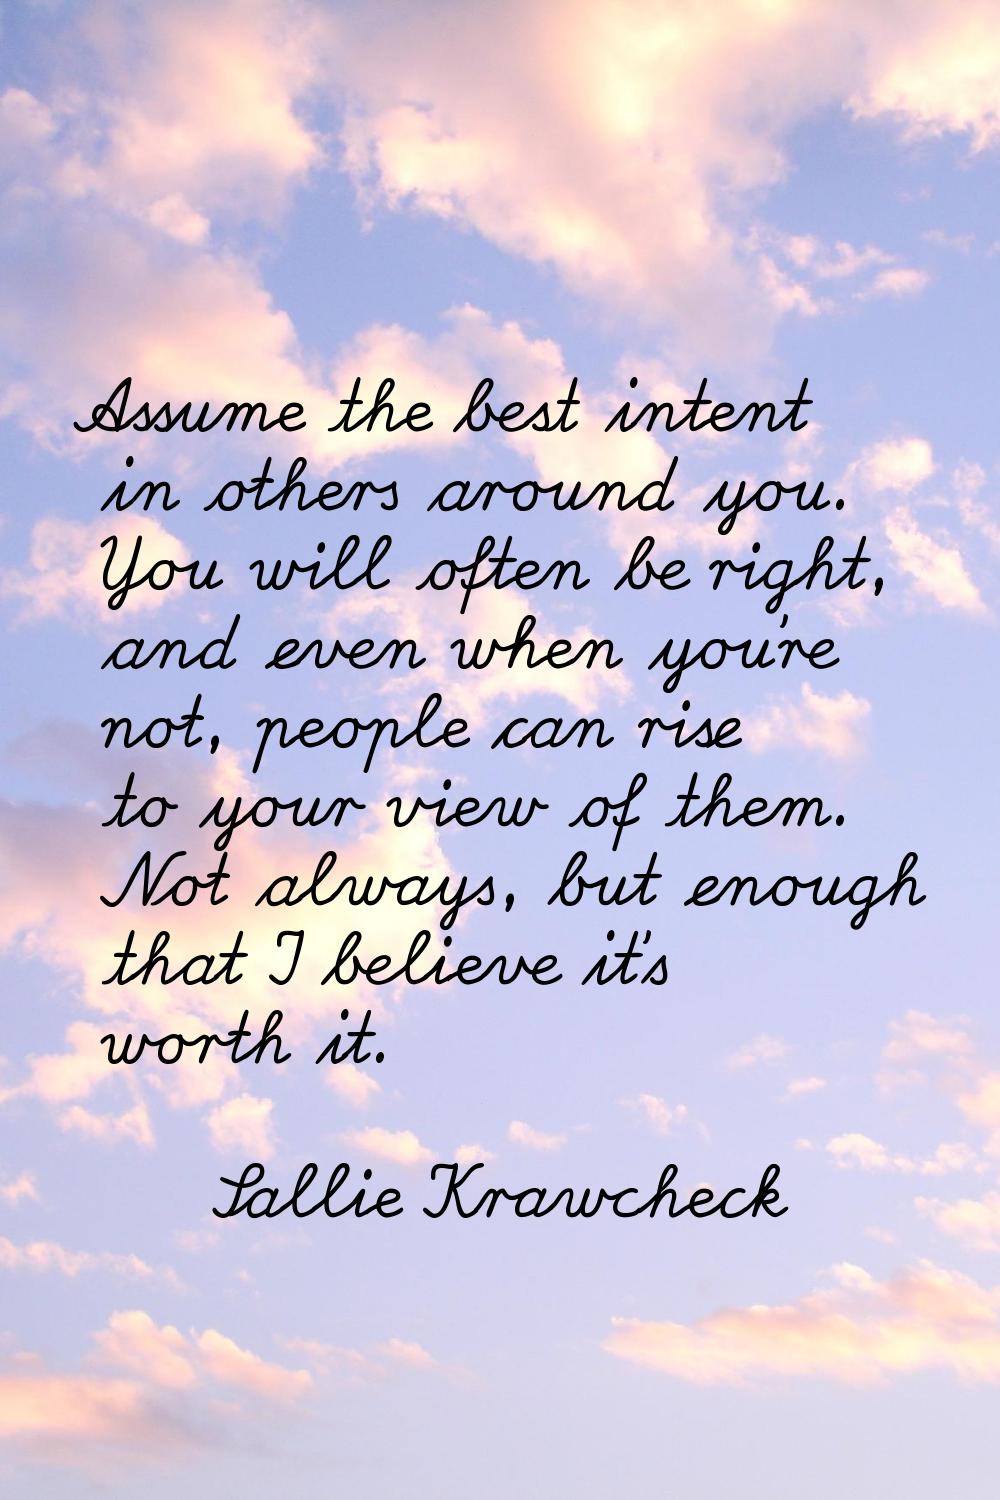 Assume the best intent in others around you. You will often be right, and even when you're not, peo